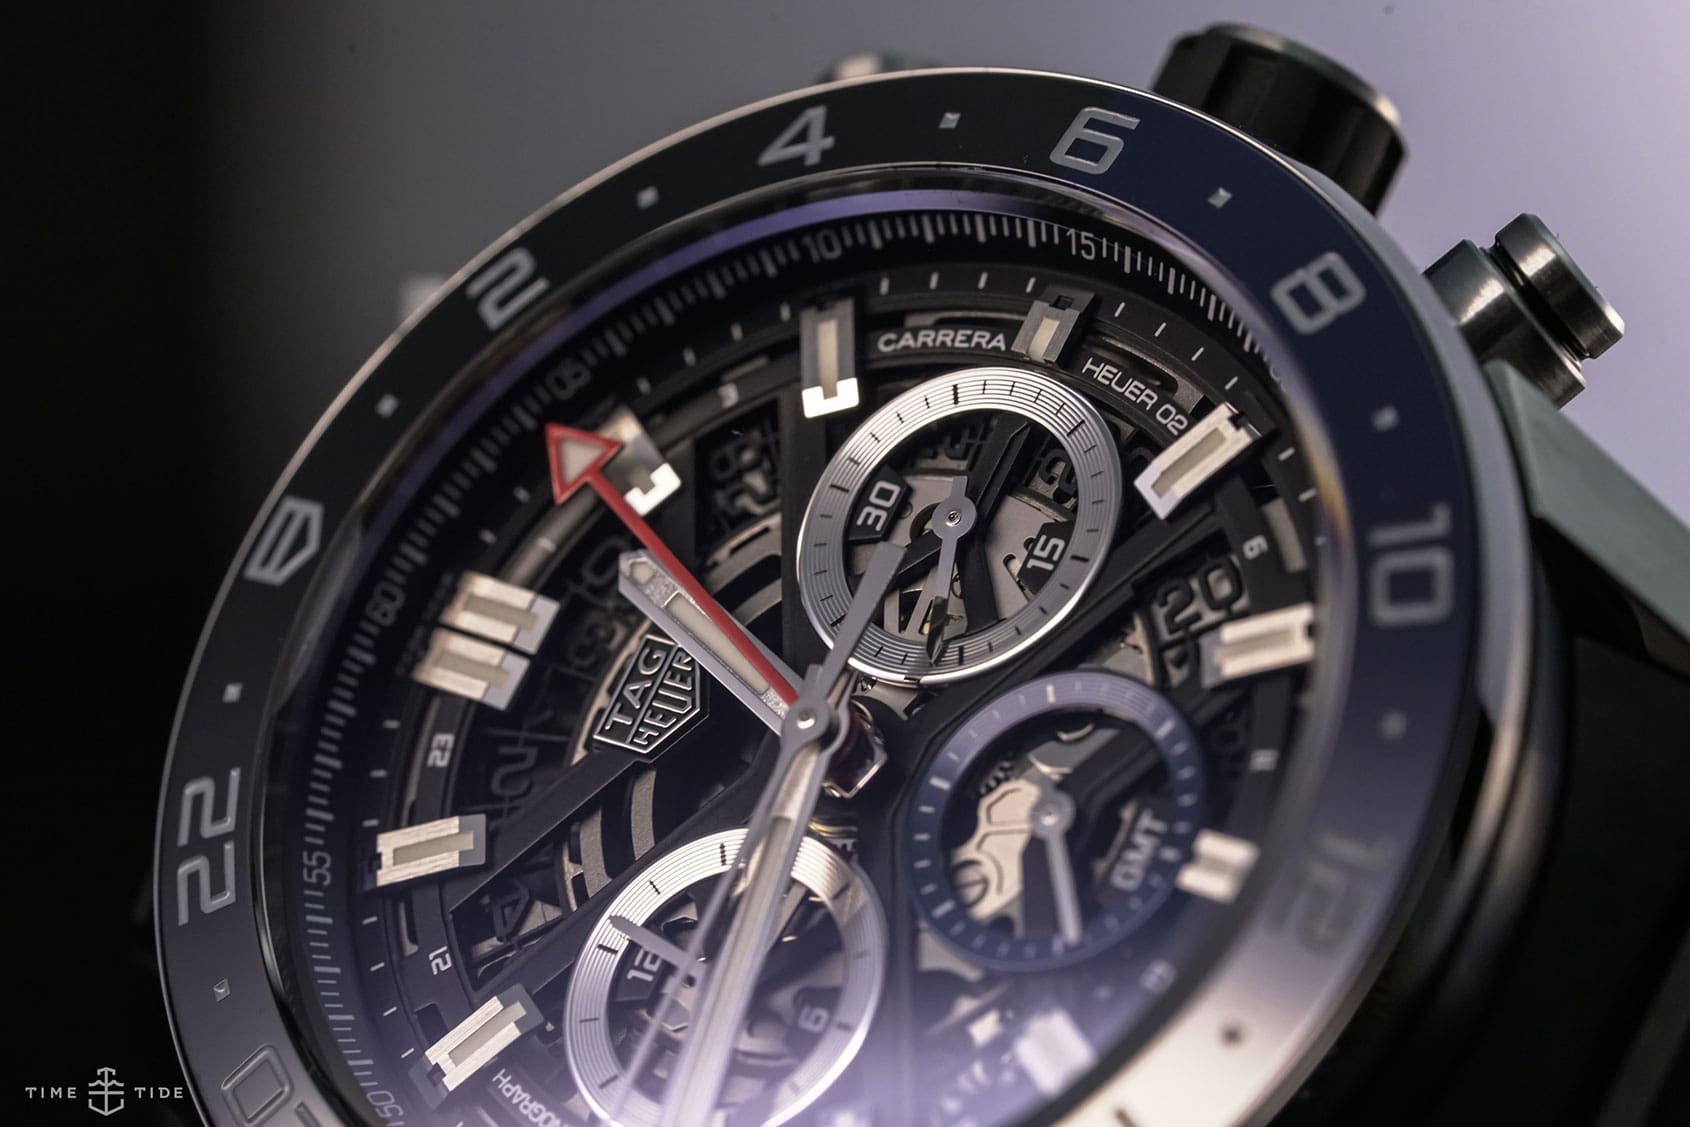 HANDS-ON: The TAG Heuer Carrera Chronograph GMT Heuer 02